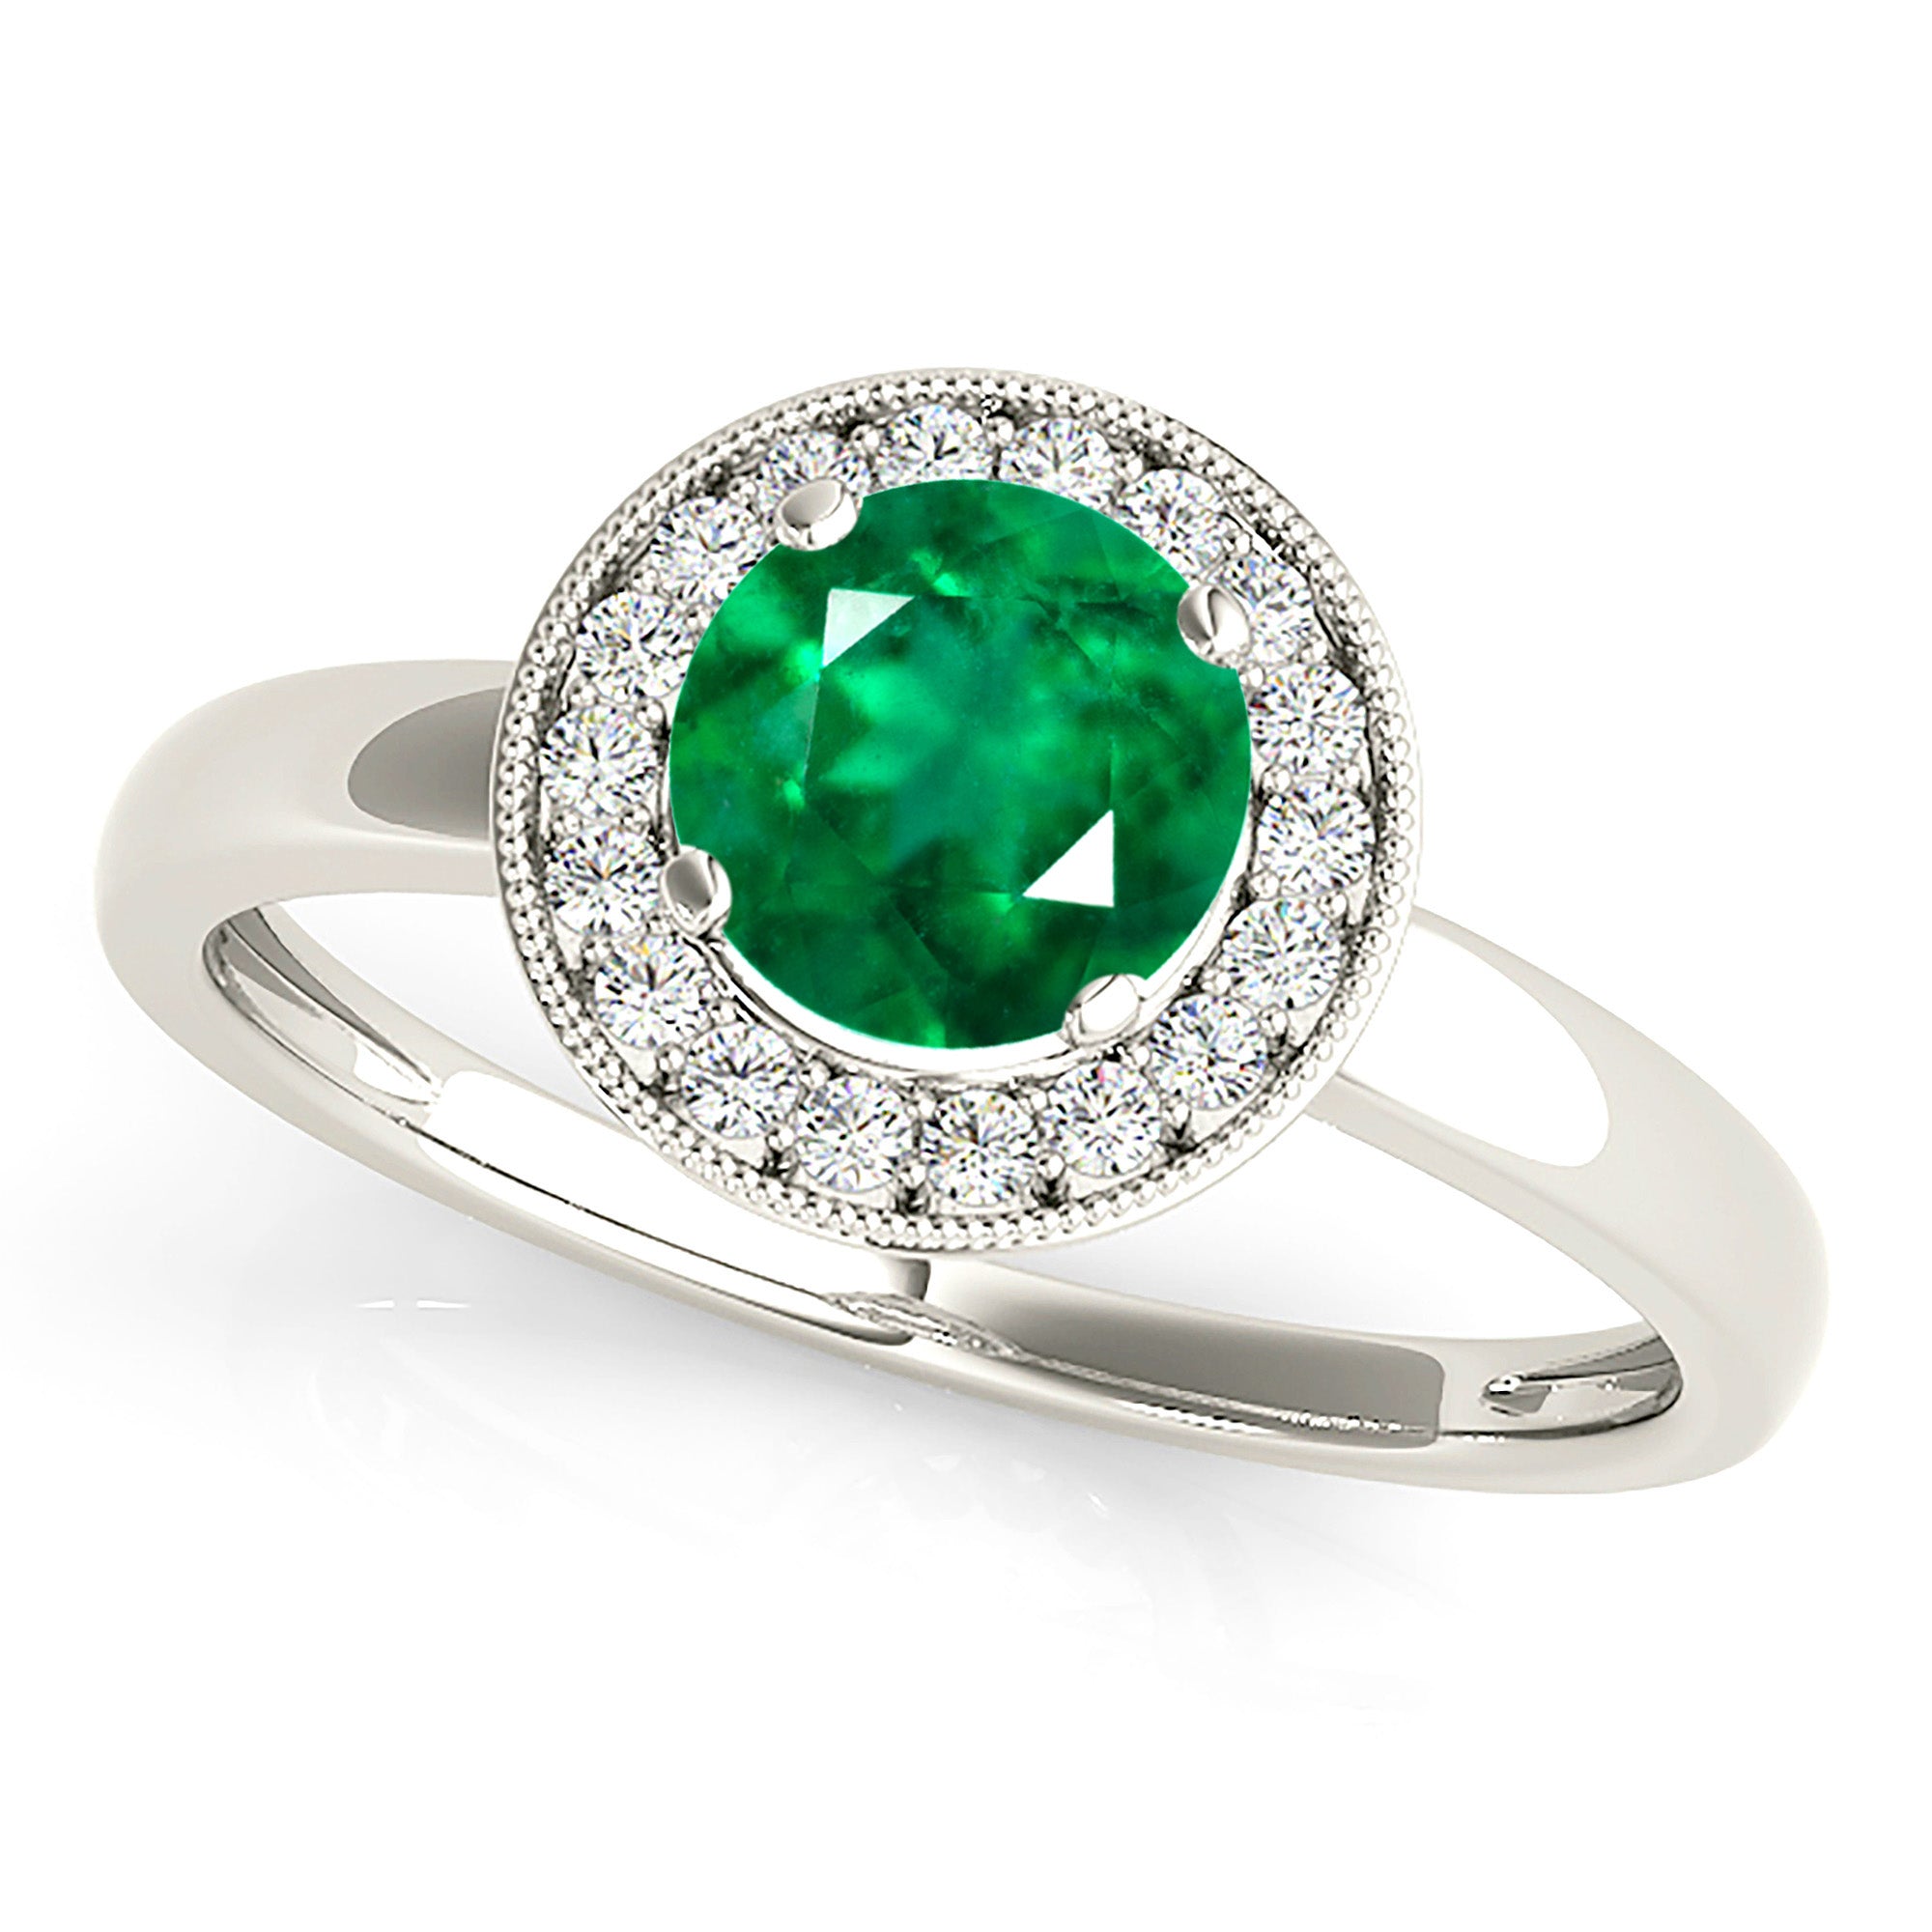 1.14 ct. Genuine Emerald Ring with 0.20 ctw. Diamond Milgrain Halo And Solid Gold Shank-in 14K/18K White, Yellow, Rose Gold and Platinum - Christmas Jewelry Gift -VIRABYANI